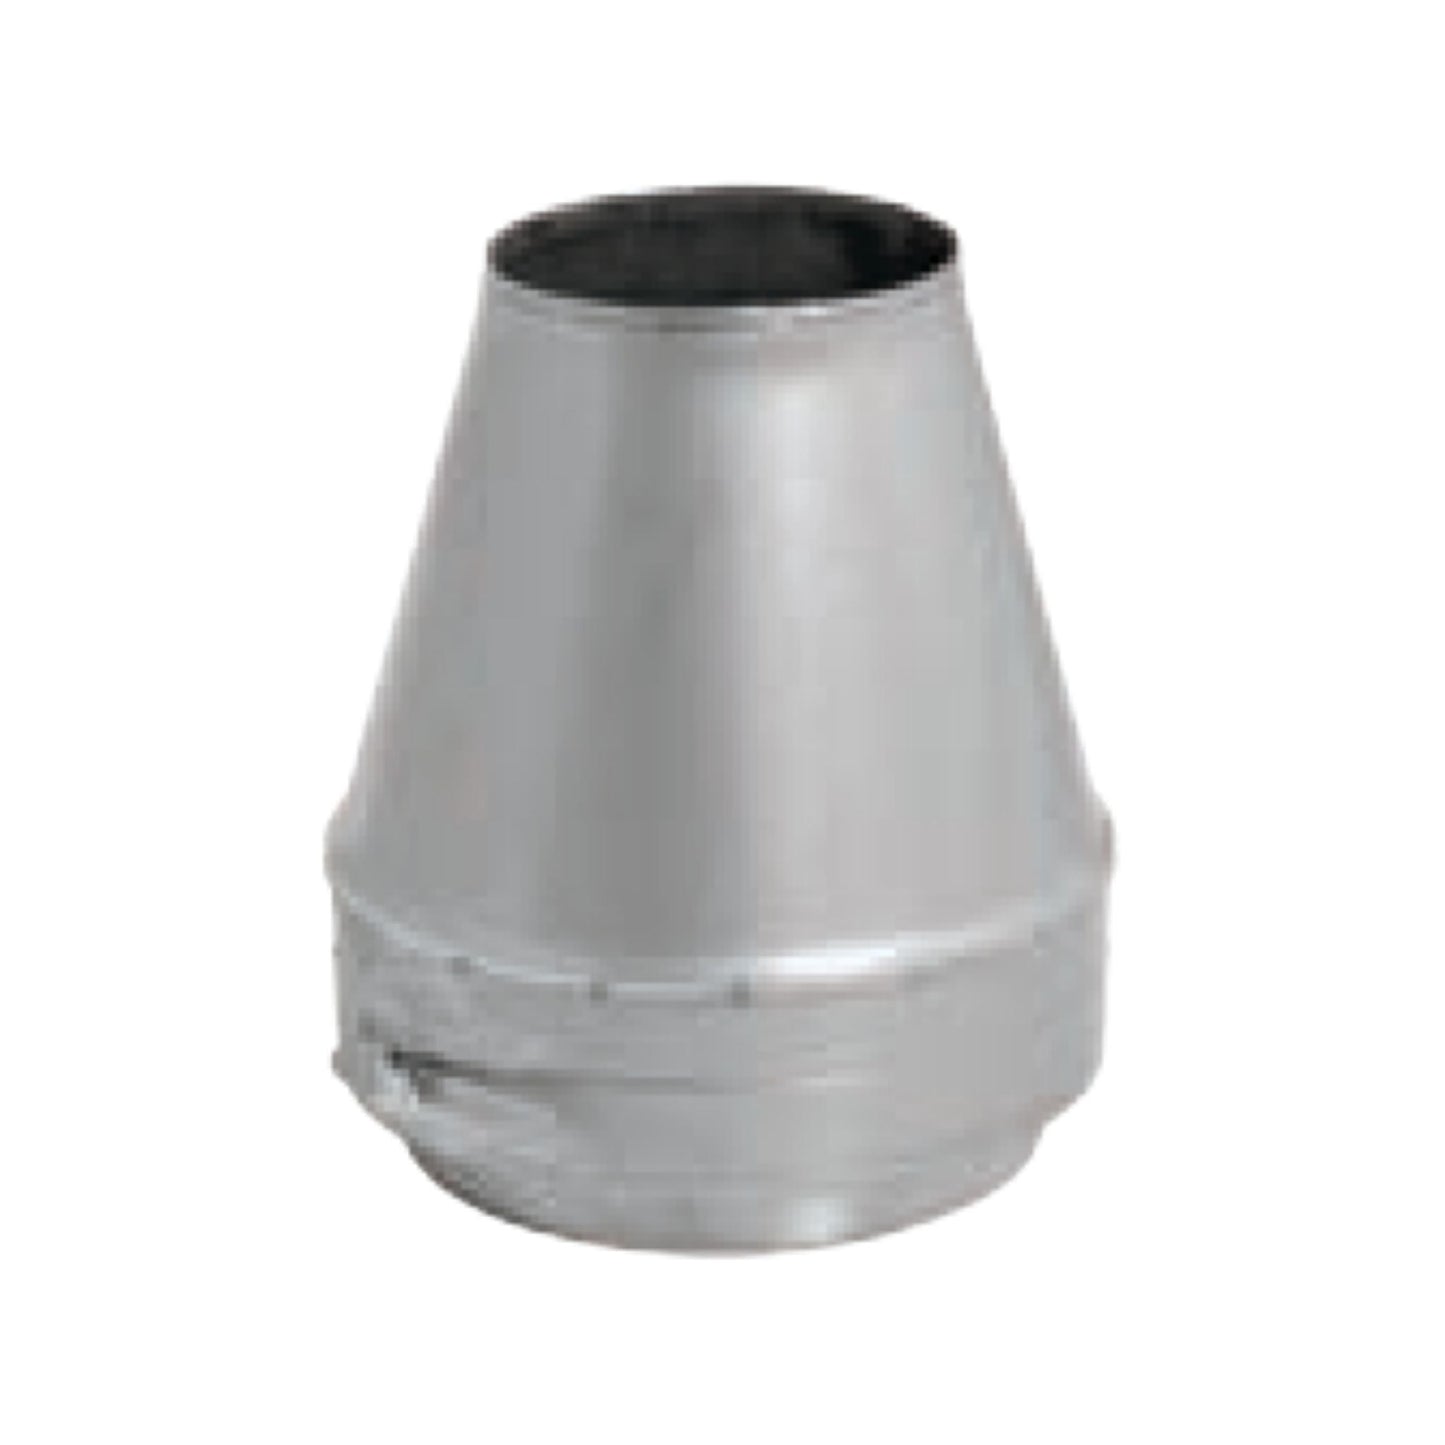 DuraVent FasNSeal W2 5" x 4" 29-4C Stainless Steel Double Wall Termination Cone